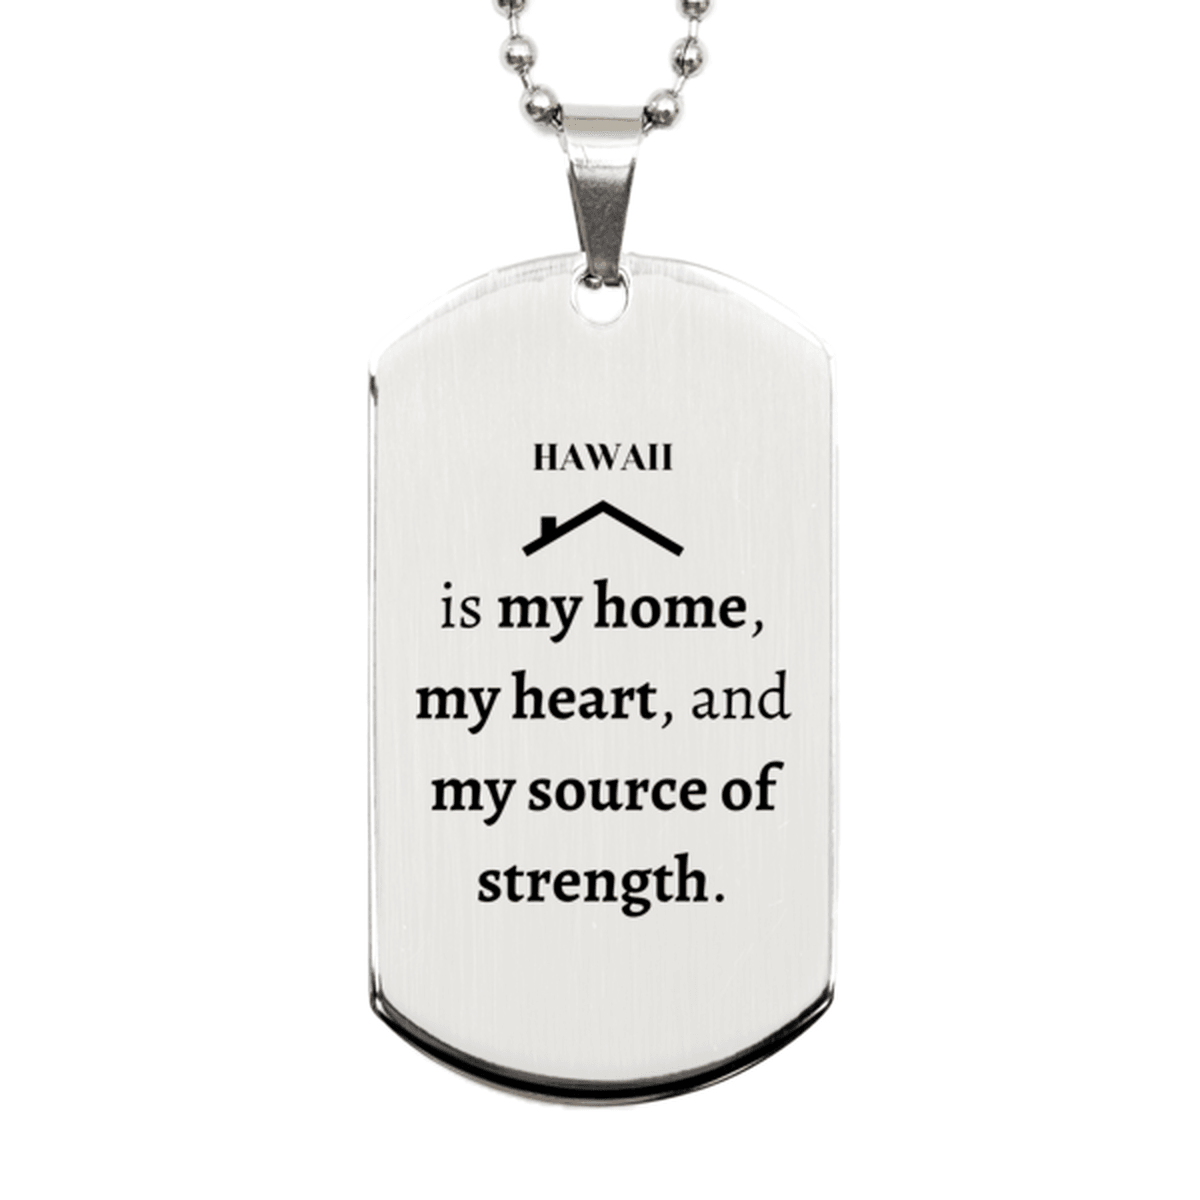 Hawaii is my home Gifts, Lovely Hawaii Birthday Christmas Silver Dog Tag For People from Hawaii, Men, Women, Friends - Mallard Moon Gift Shop